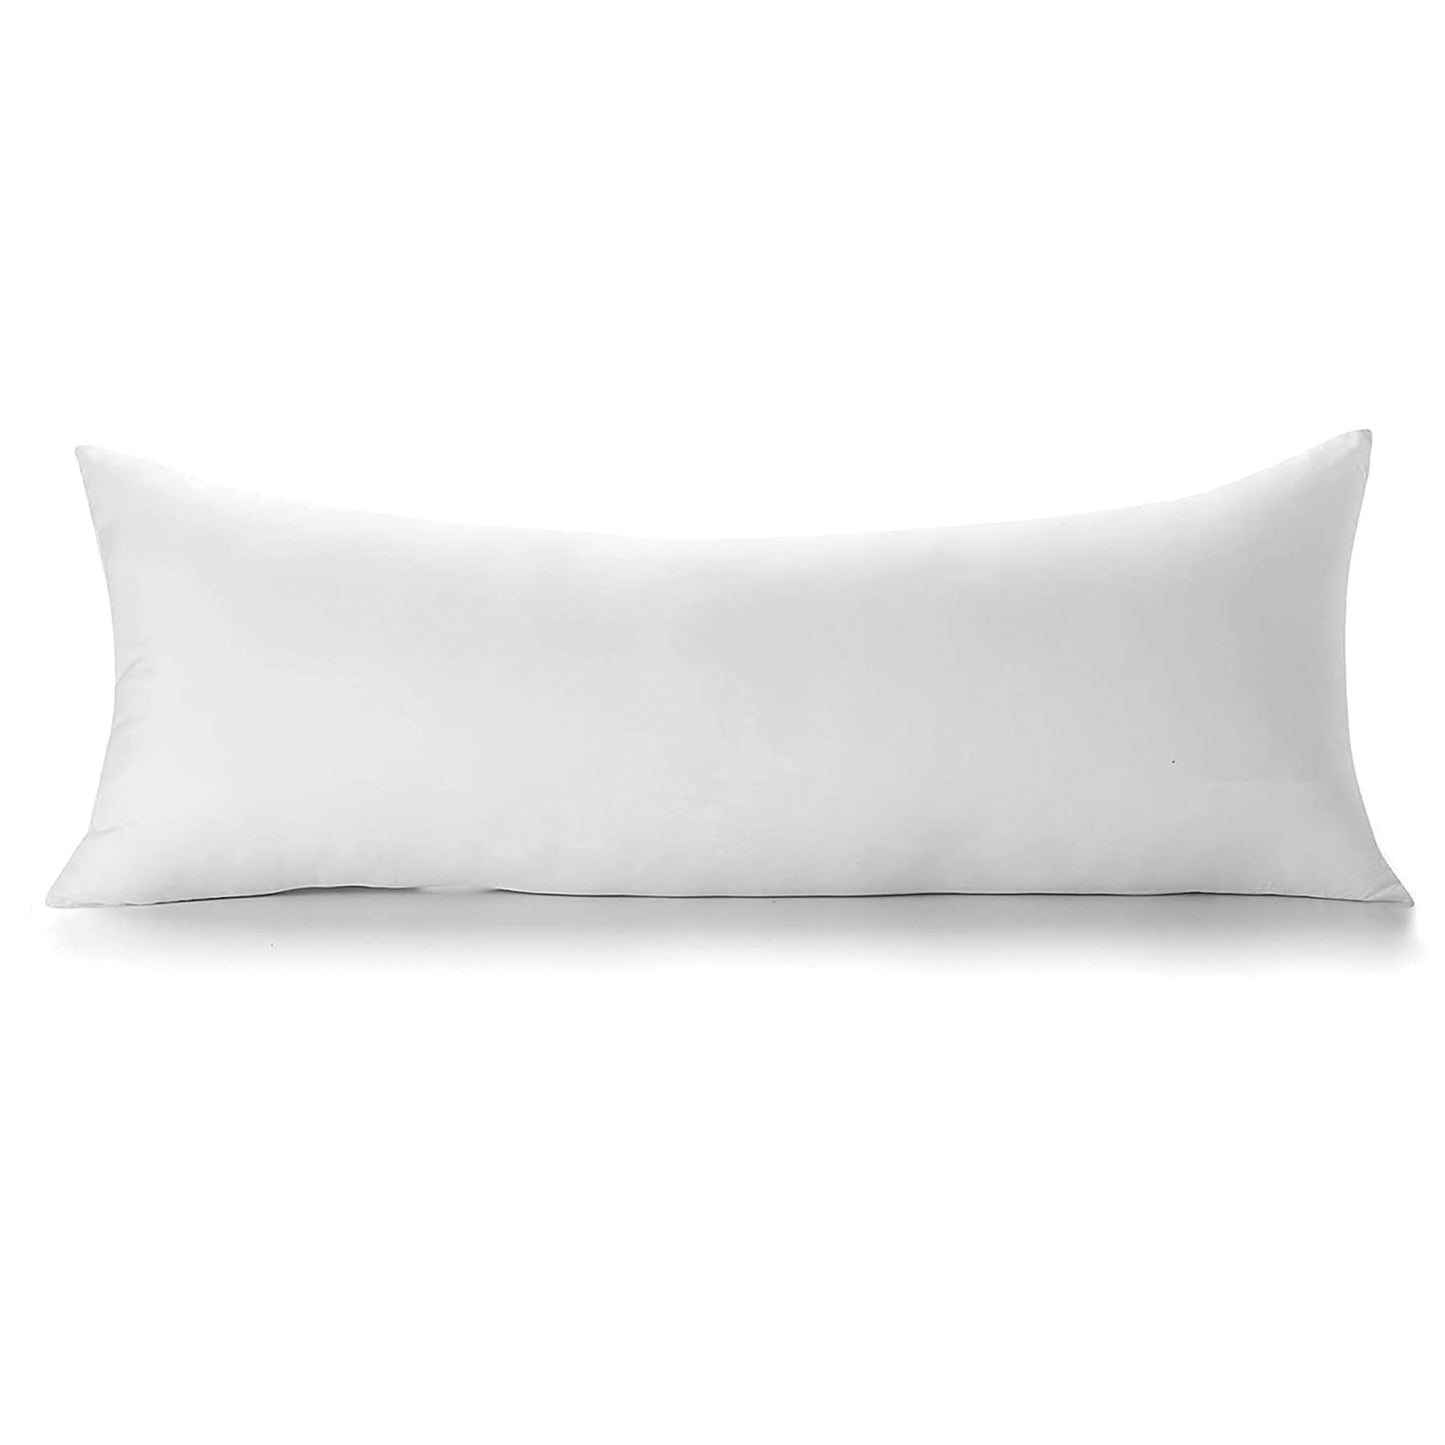 A heavenly white body pillow filled with 100% goose down, boasting an opulent 600 fill power for unmatched softness and luxury."